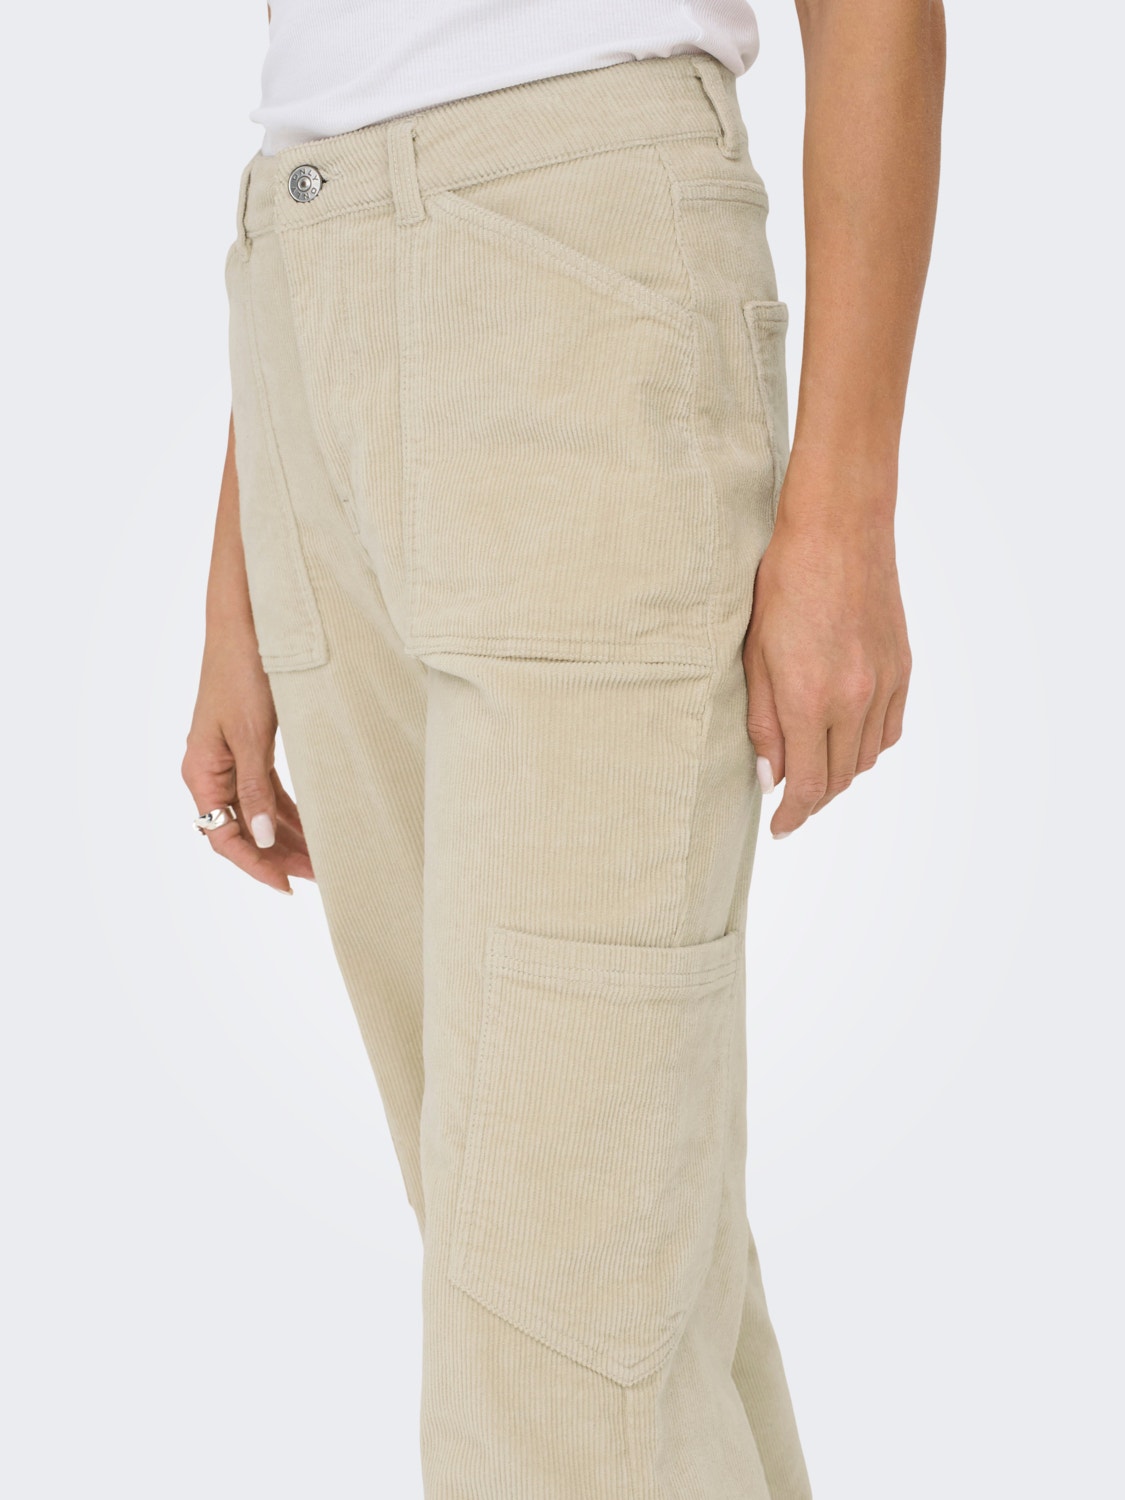 ONLY Cargo pants with high waist -Oatmeal - 15298637